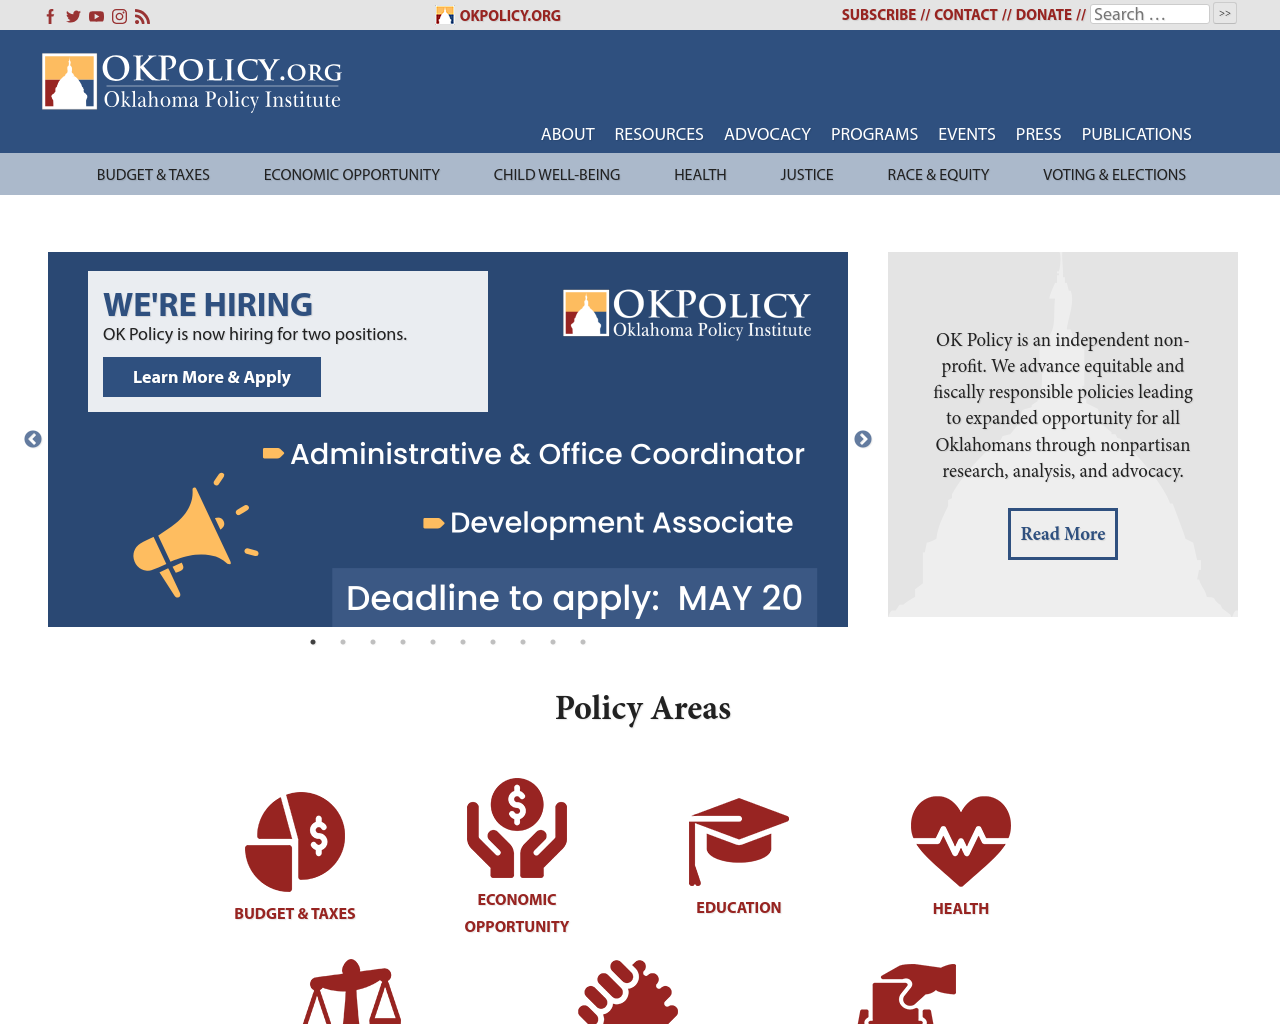 okpolicy.org